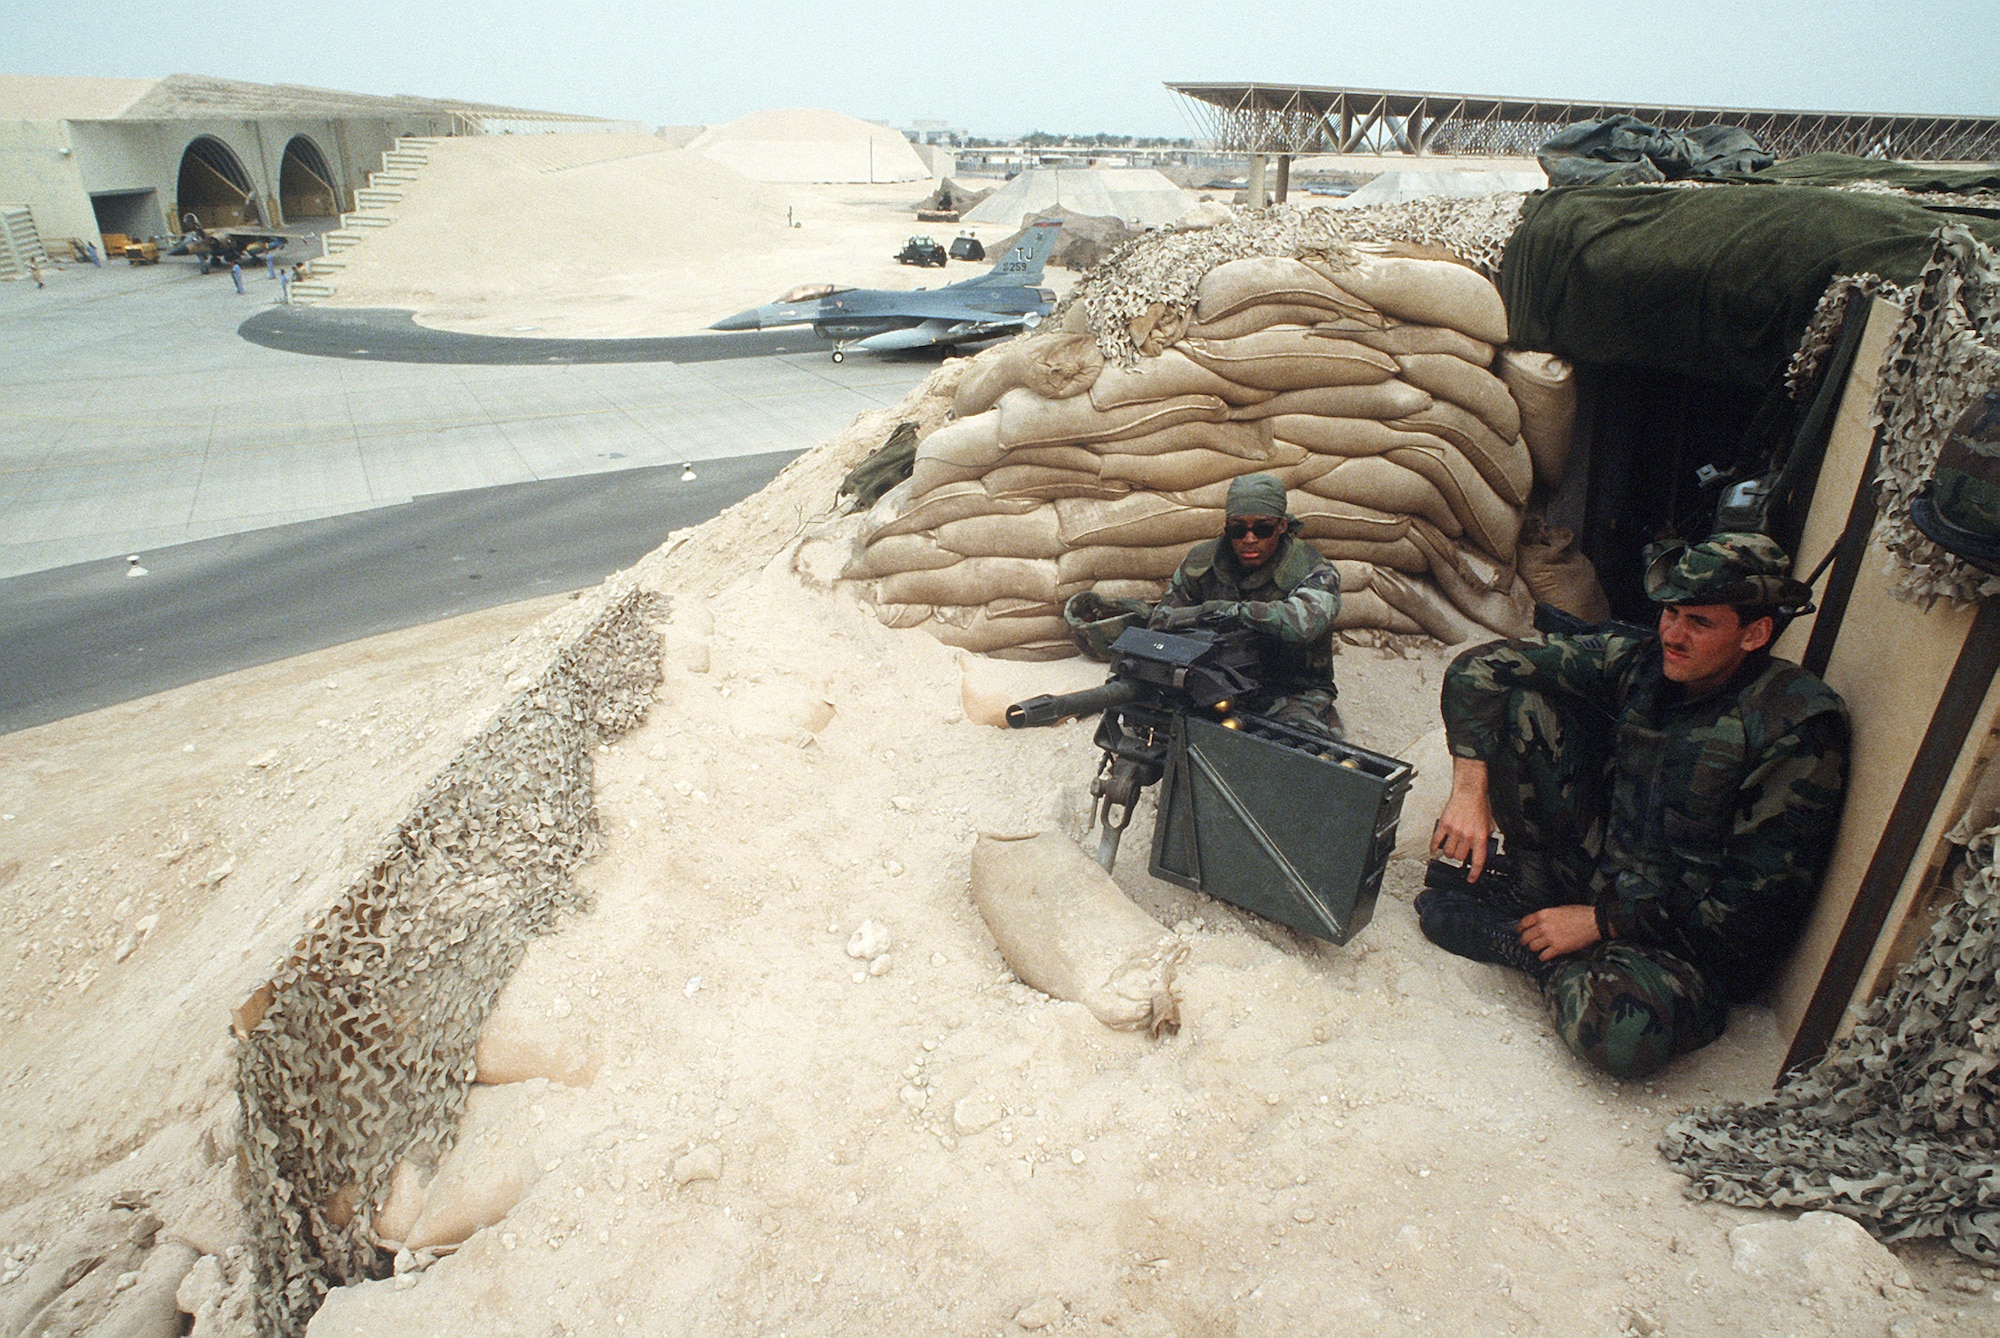 The mission of Air Force civil engineers in Operation Desert Shield and Desert Storm was to bed down personnel and aircraft, then operate and maintain those bases. In nearly four months, approximately 3,000 engineers built 21 tent cities, bedded 55,000 troops and more than 1,500 aircraft. (Courtesy photo)